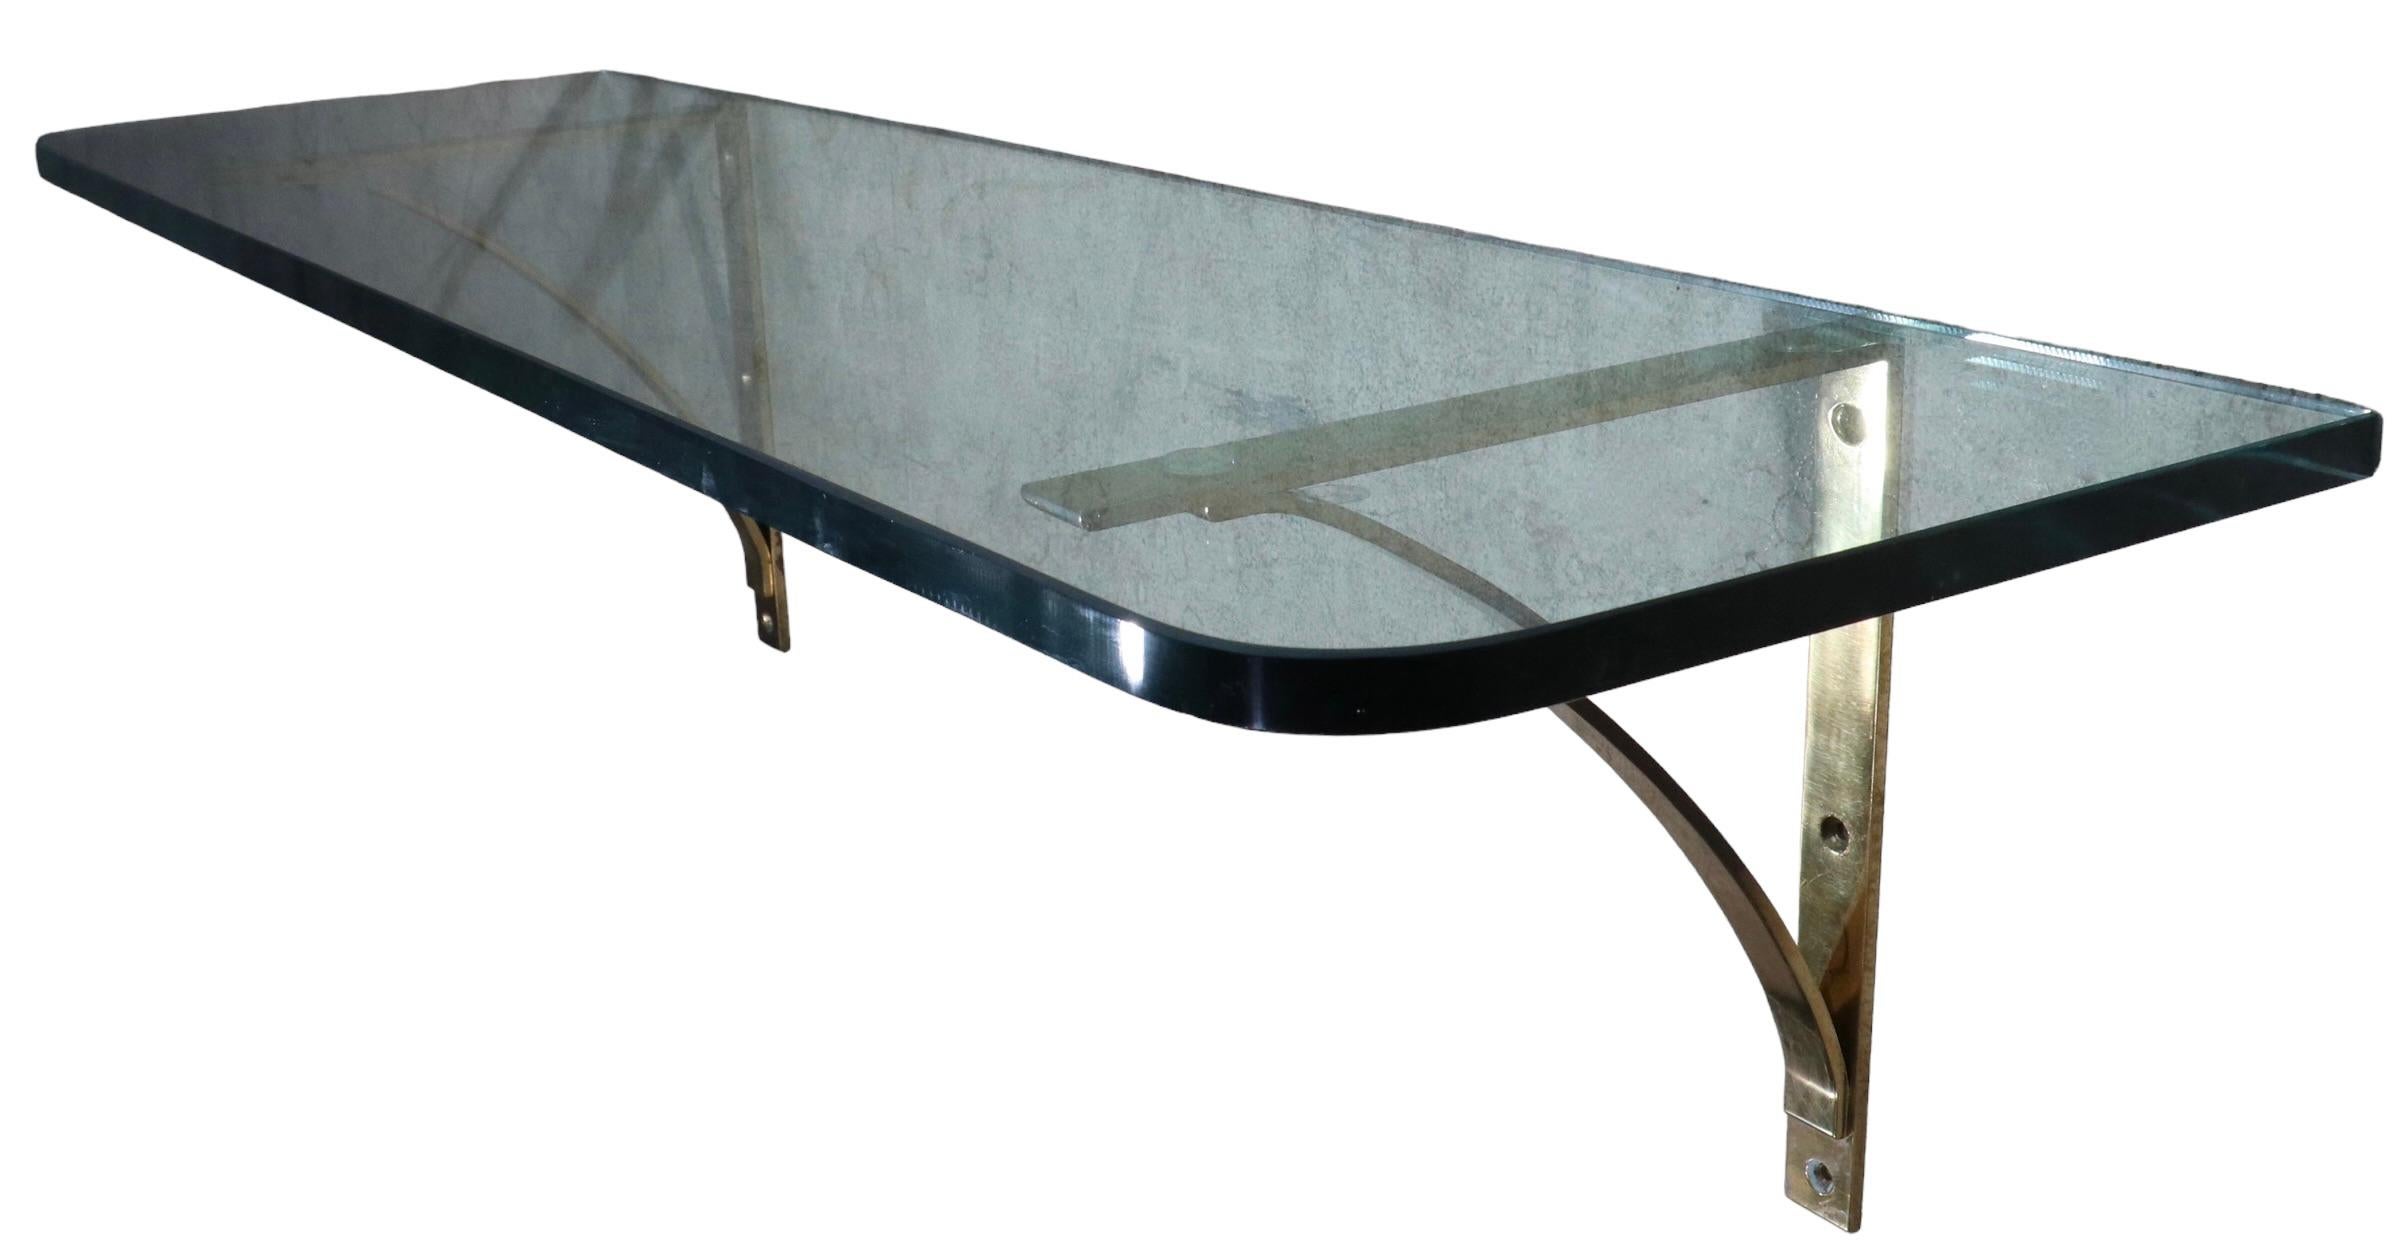 Post Modern Plate Glass and Brass Wall Mount Shelf, C. 1970's For Sale 10